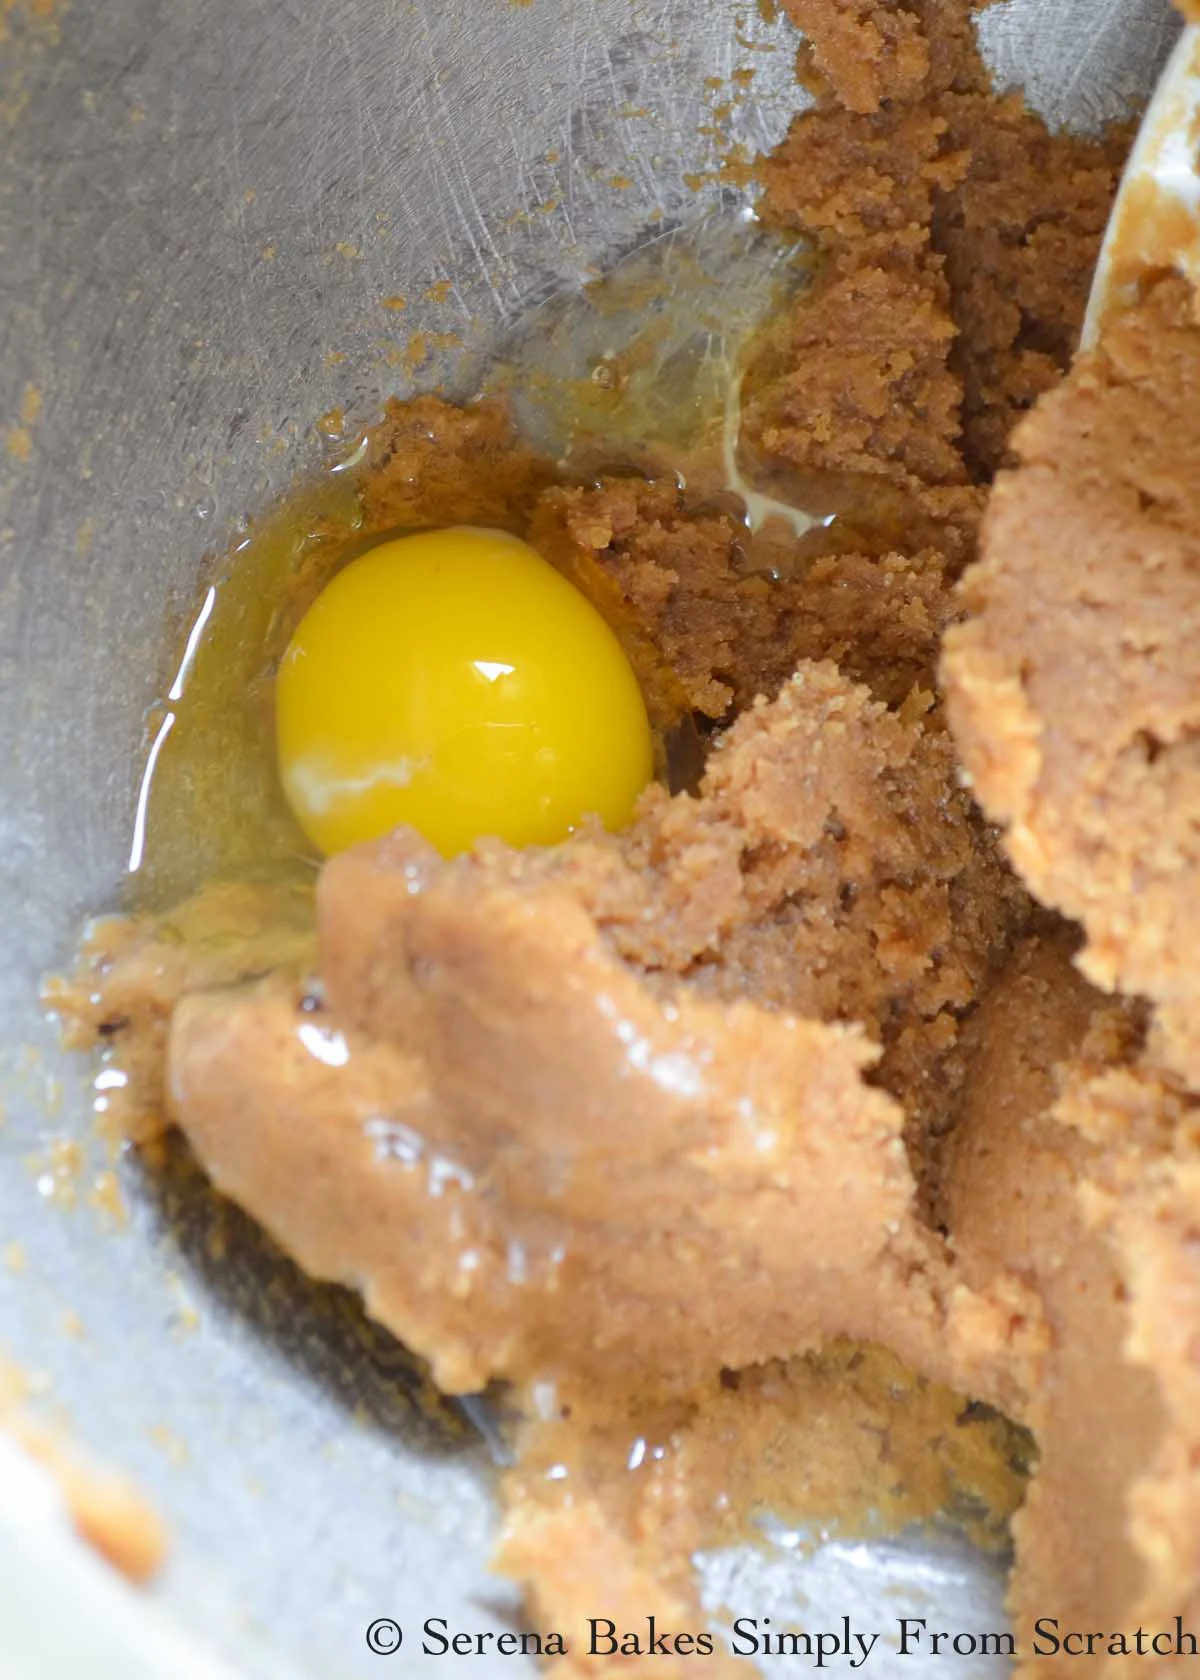 Whole egg being mixed into creamed sugar mixture.